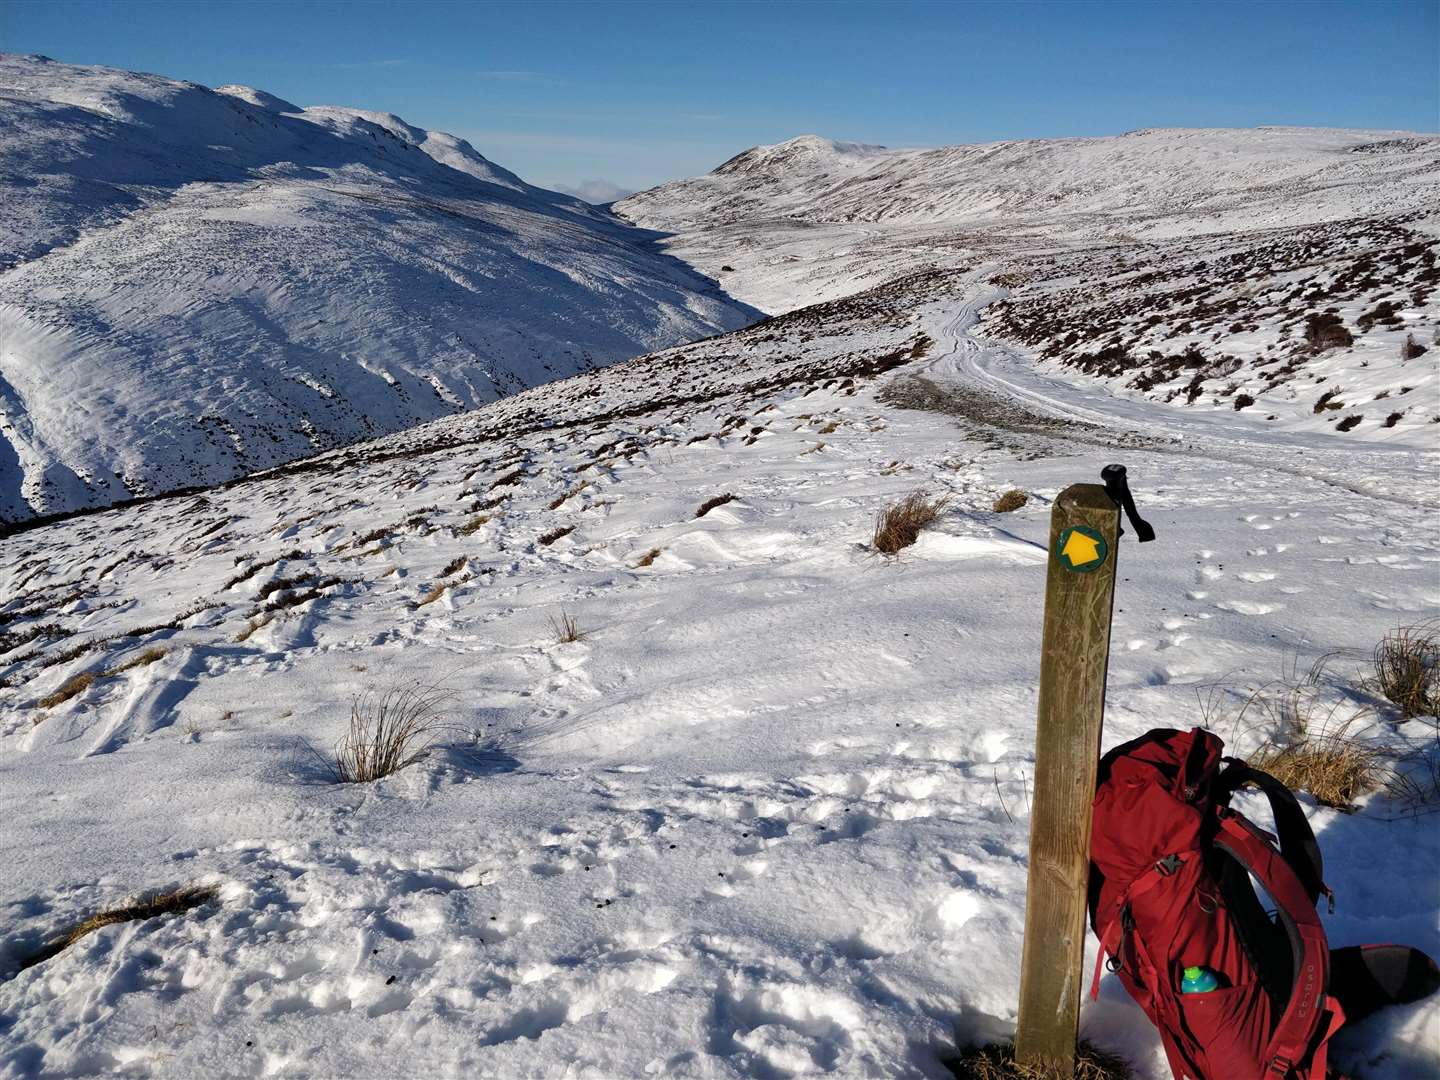 Hill walkers and mountaineers are being urged to take extra care in the coming weeks.